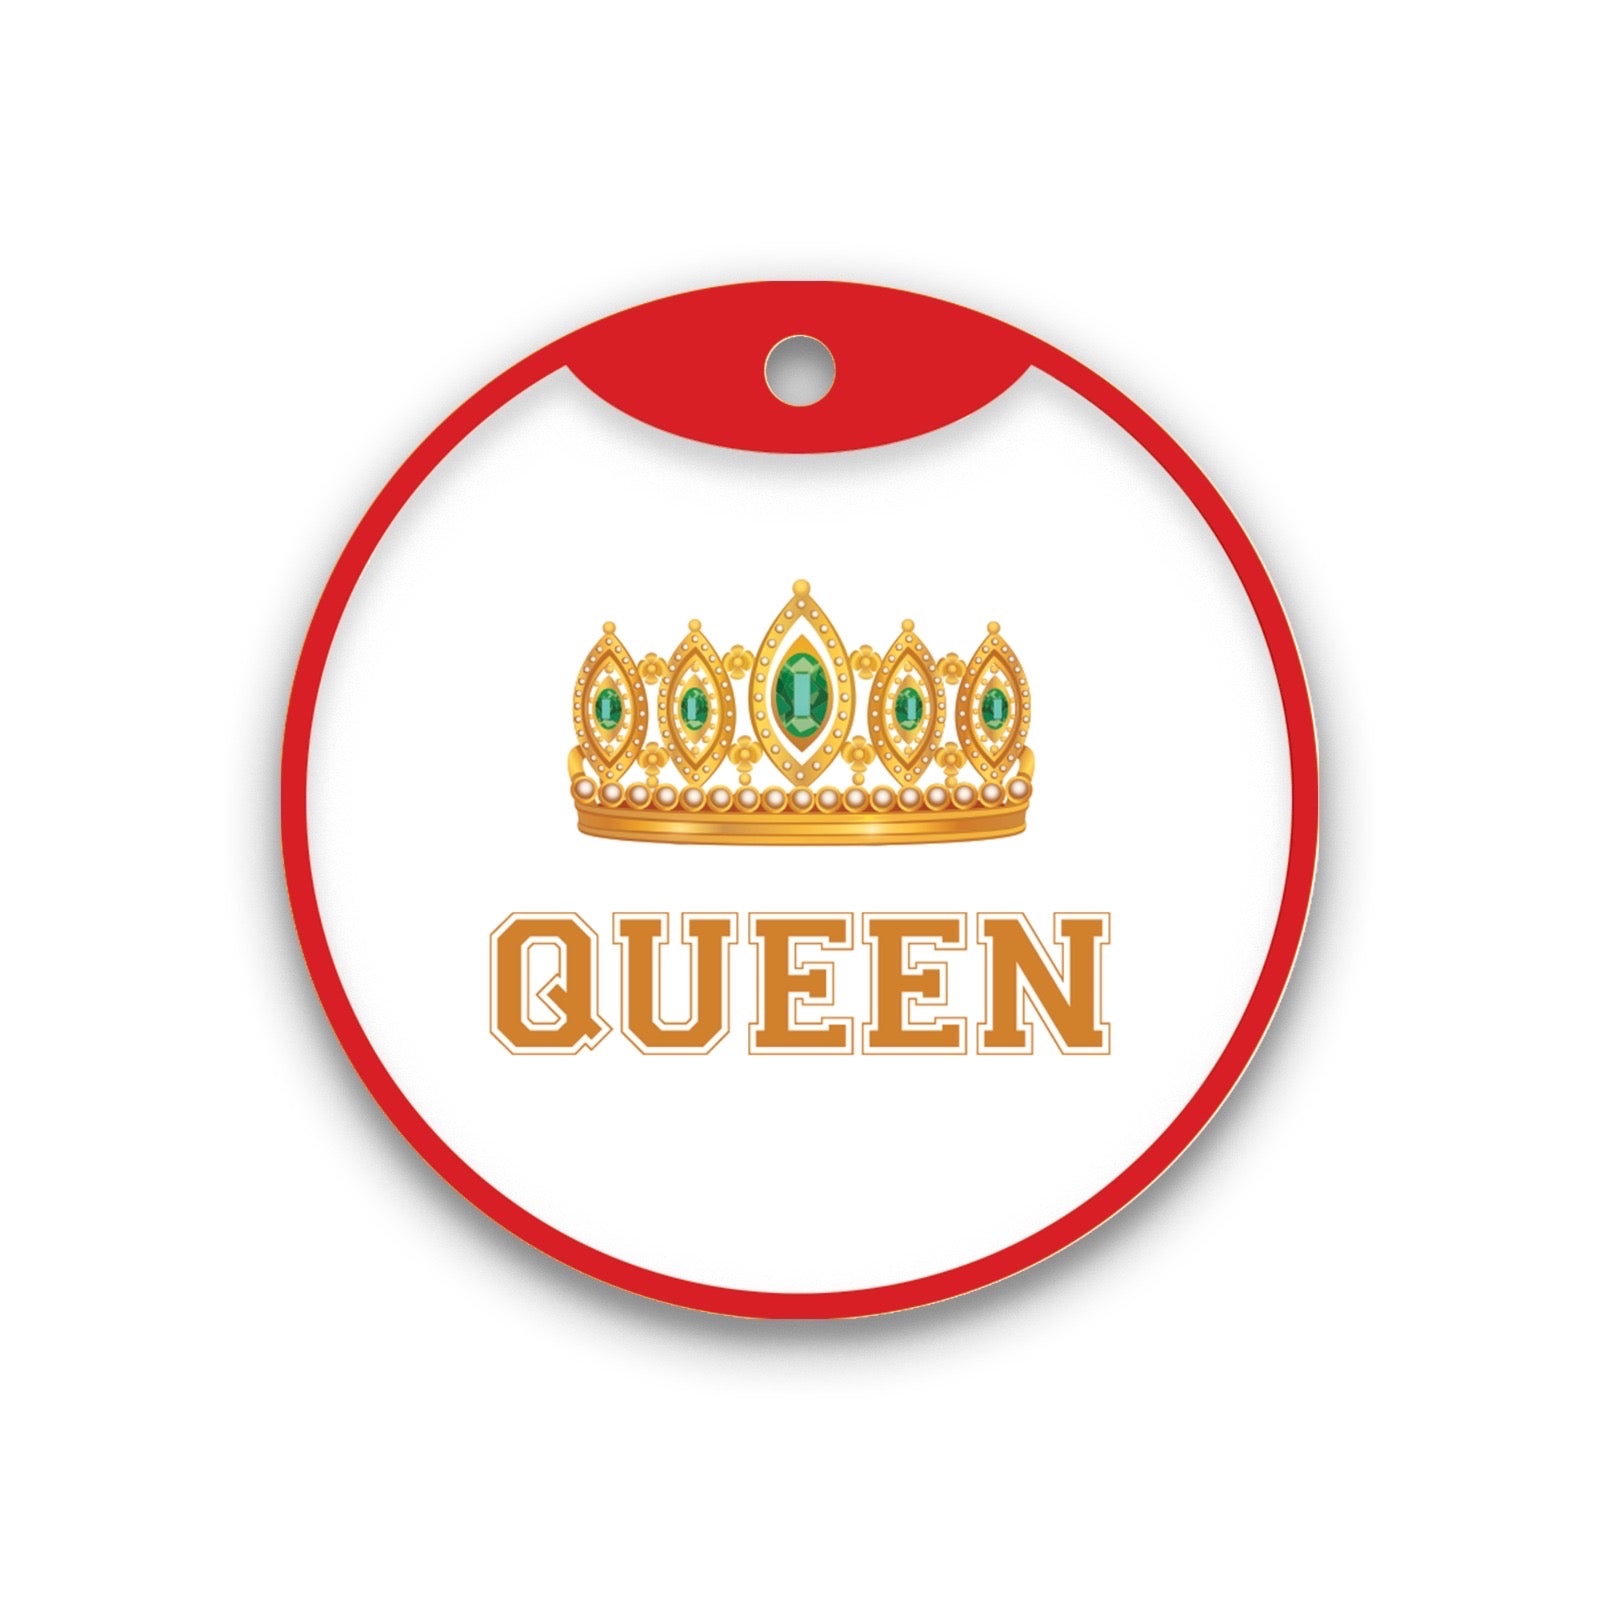 Customized Pet Id Tag - Queen